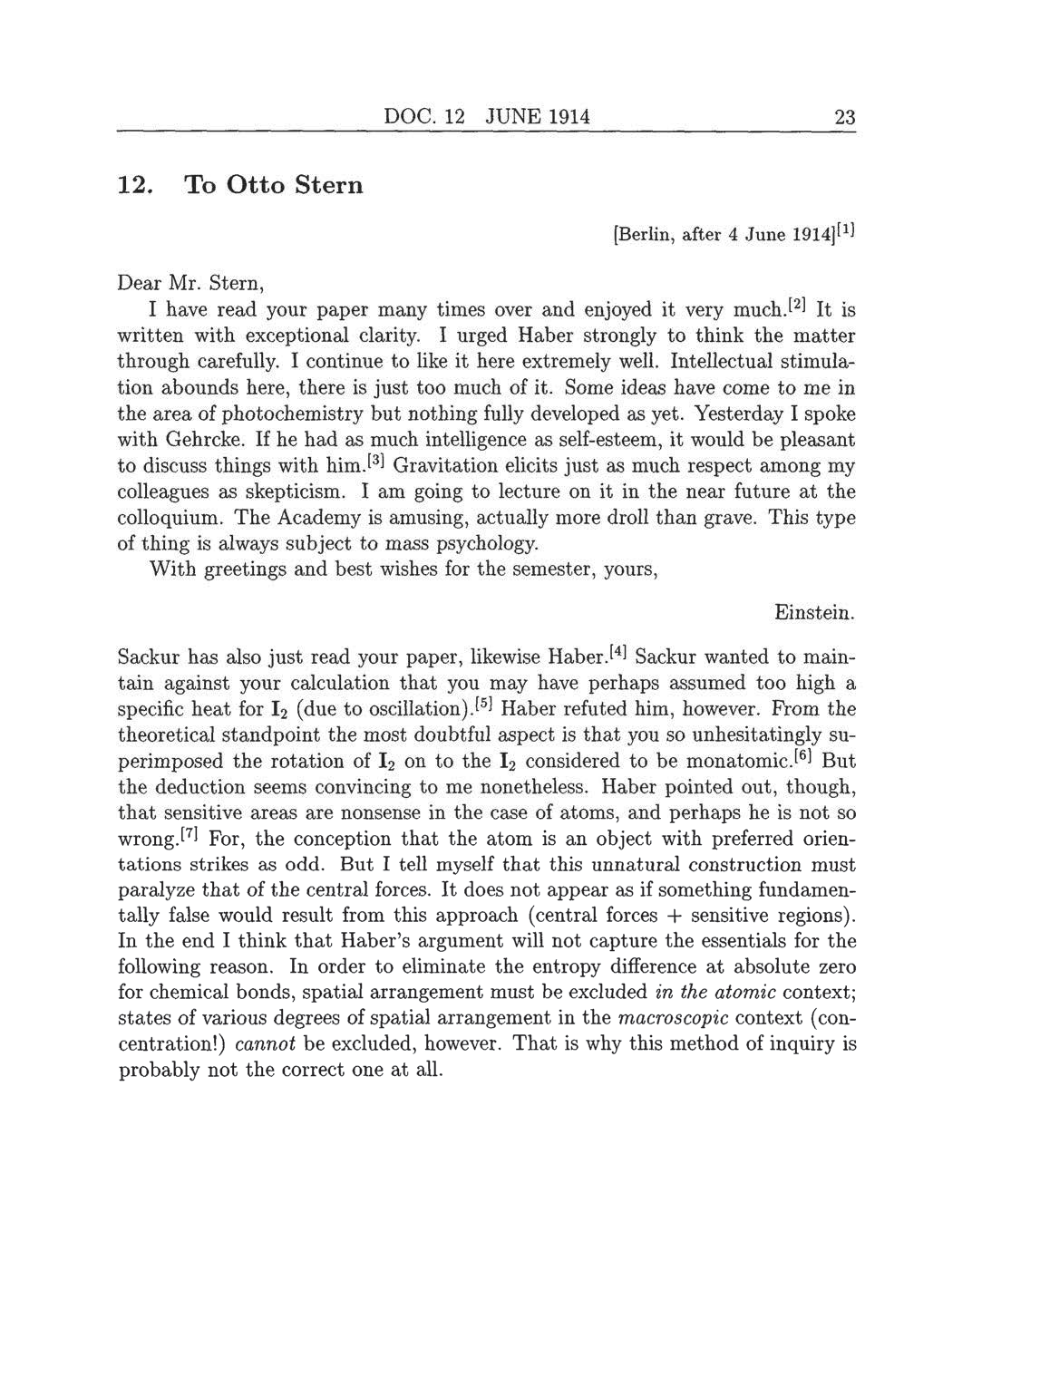 Volume 8: The Berlin Years: Correspondence, 1914-1918 (English translation supplement) page 23